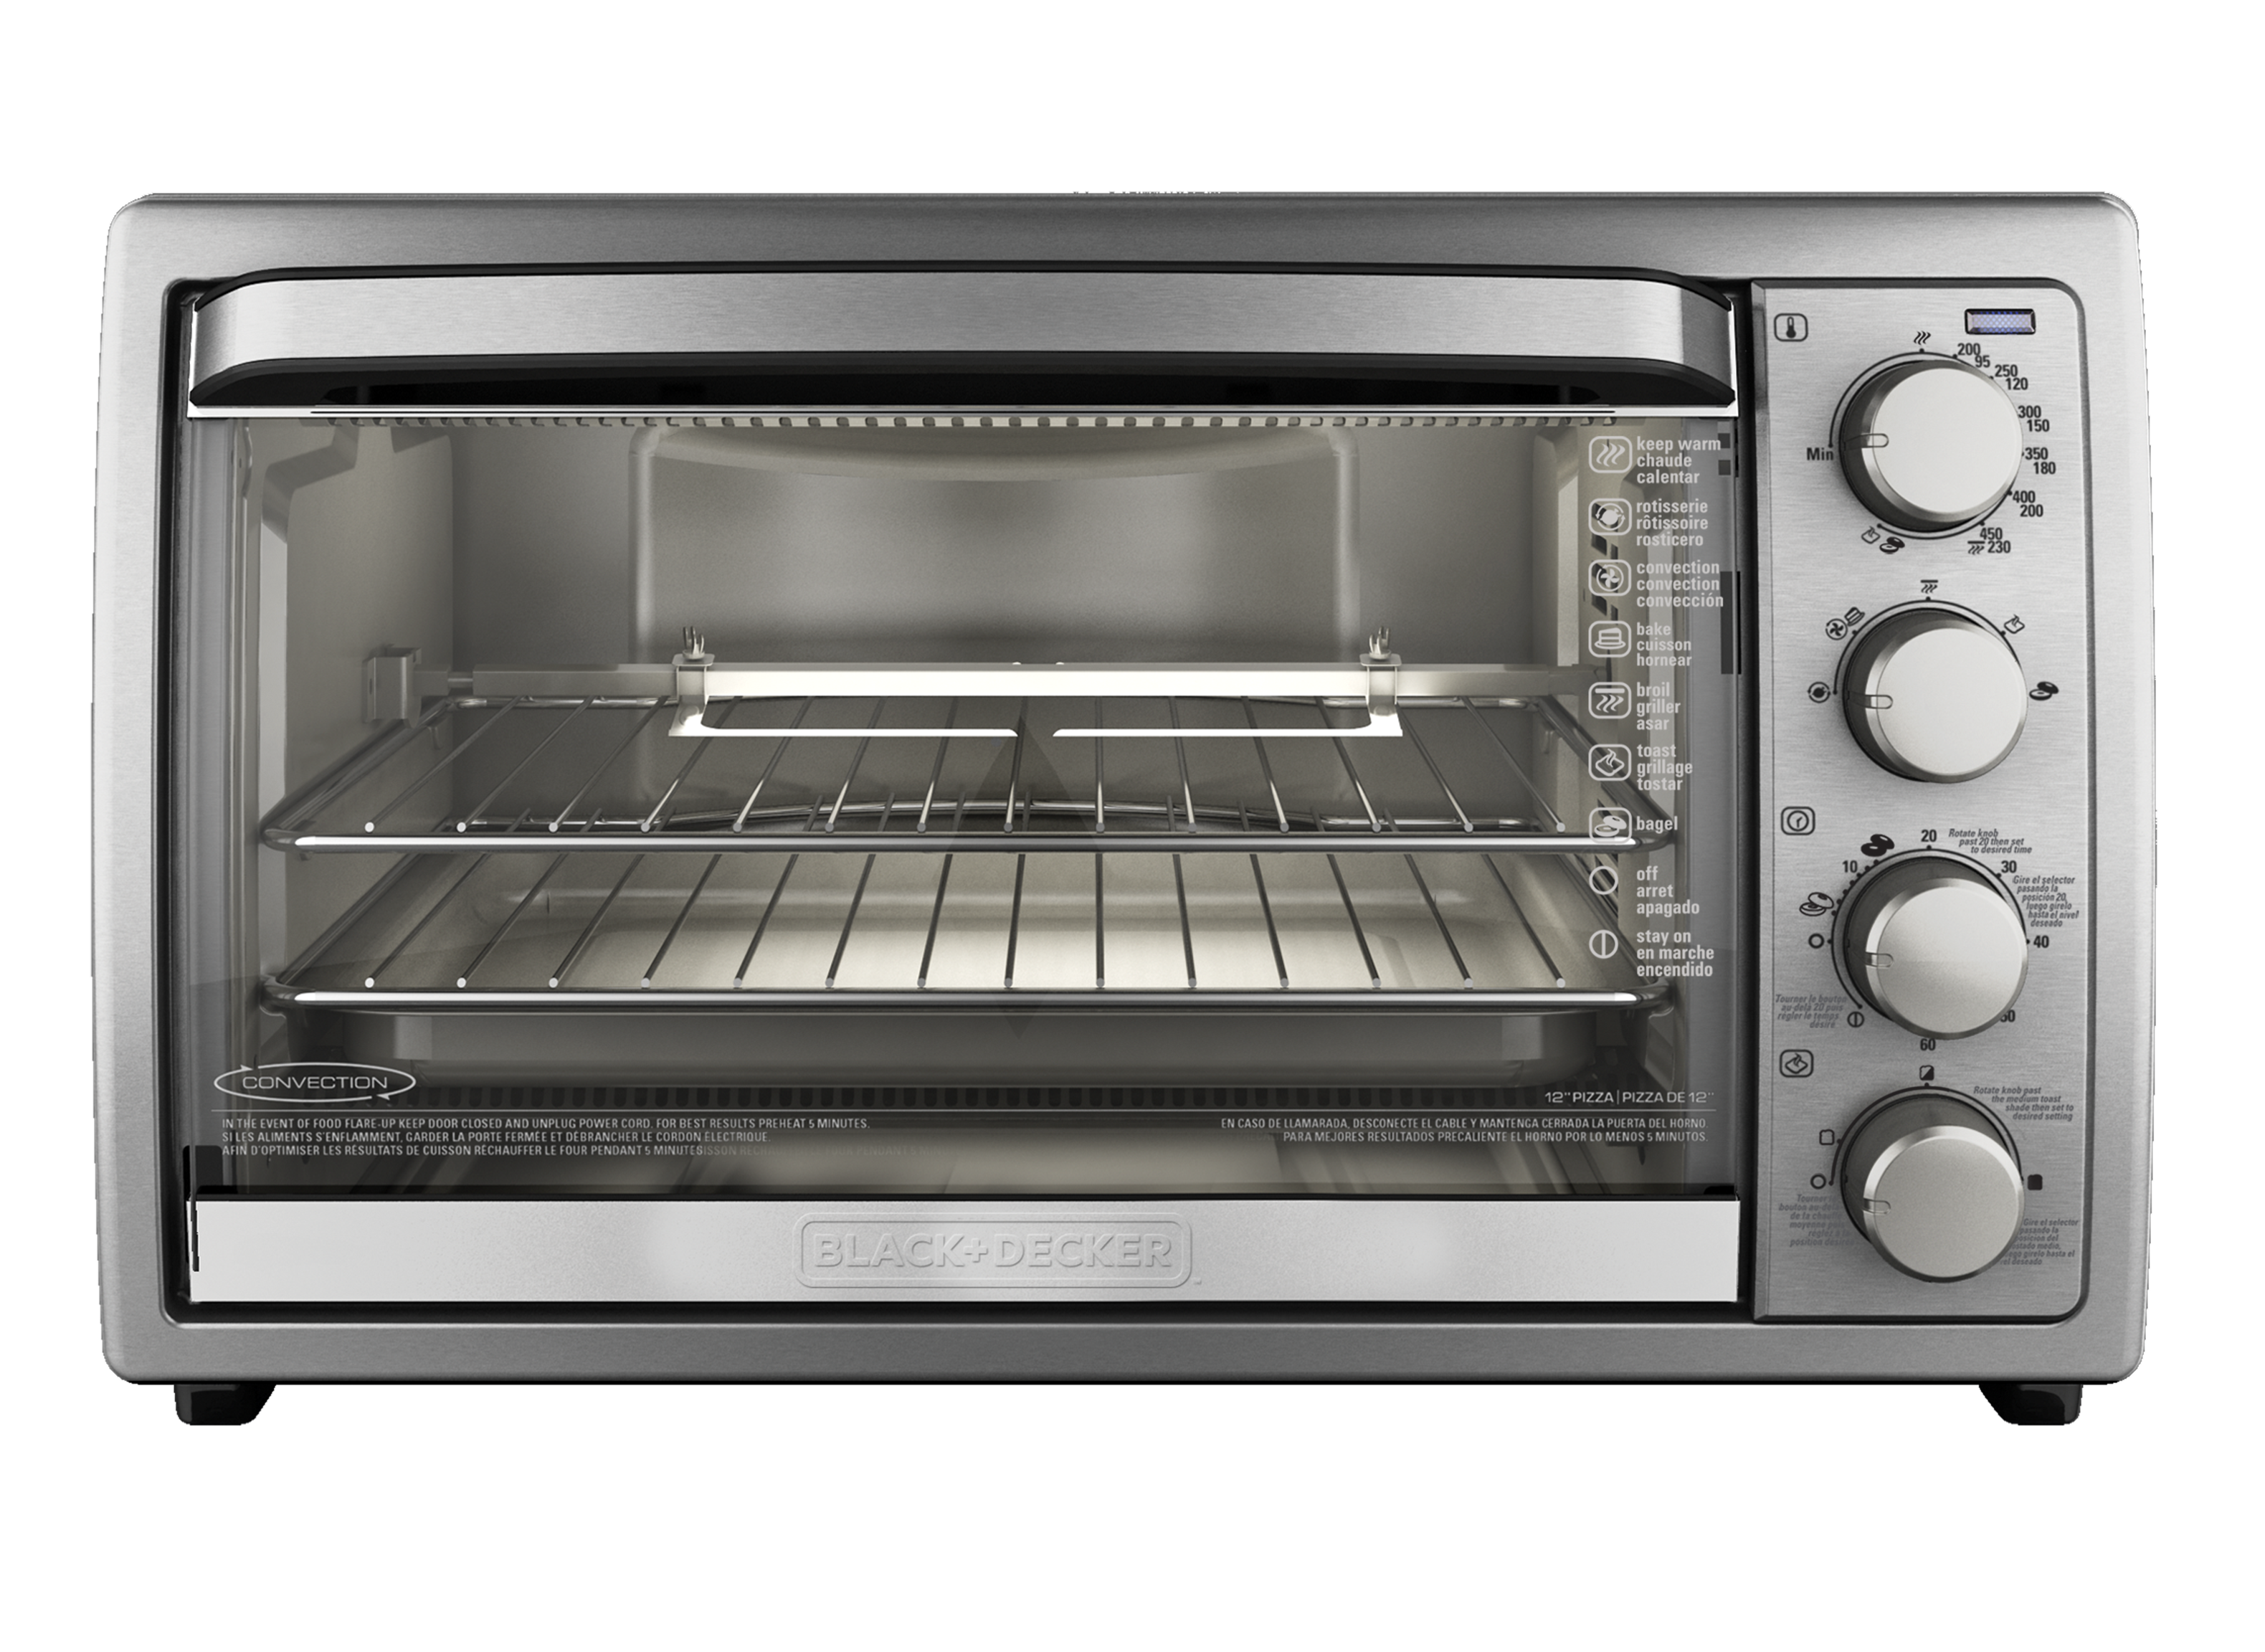 https://crdms.images.consumerreports.org/prod/products/cr/models/401040-toaster-ovens-black-decker-rotisserie-convection-to4314ssd-10012276.png